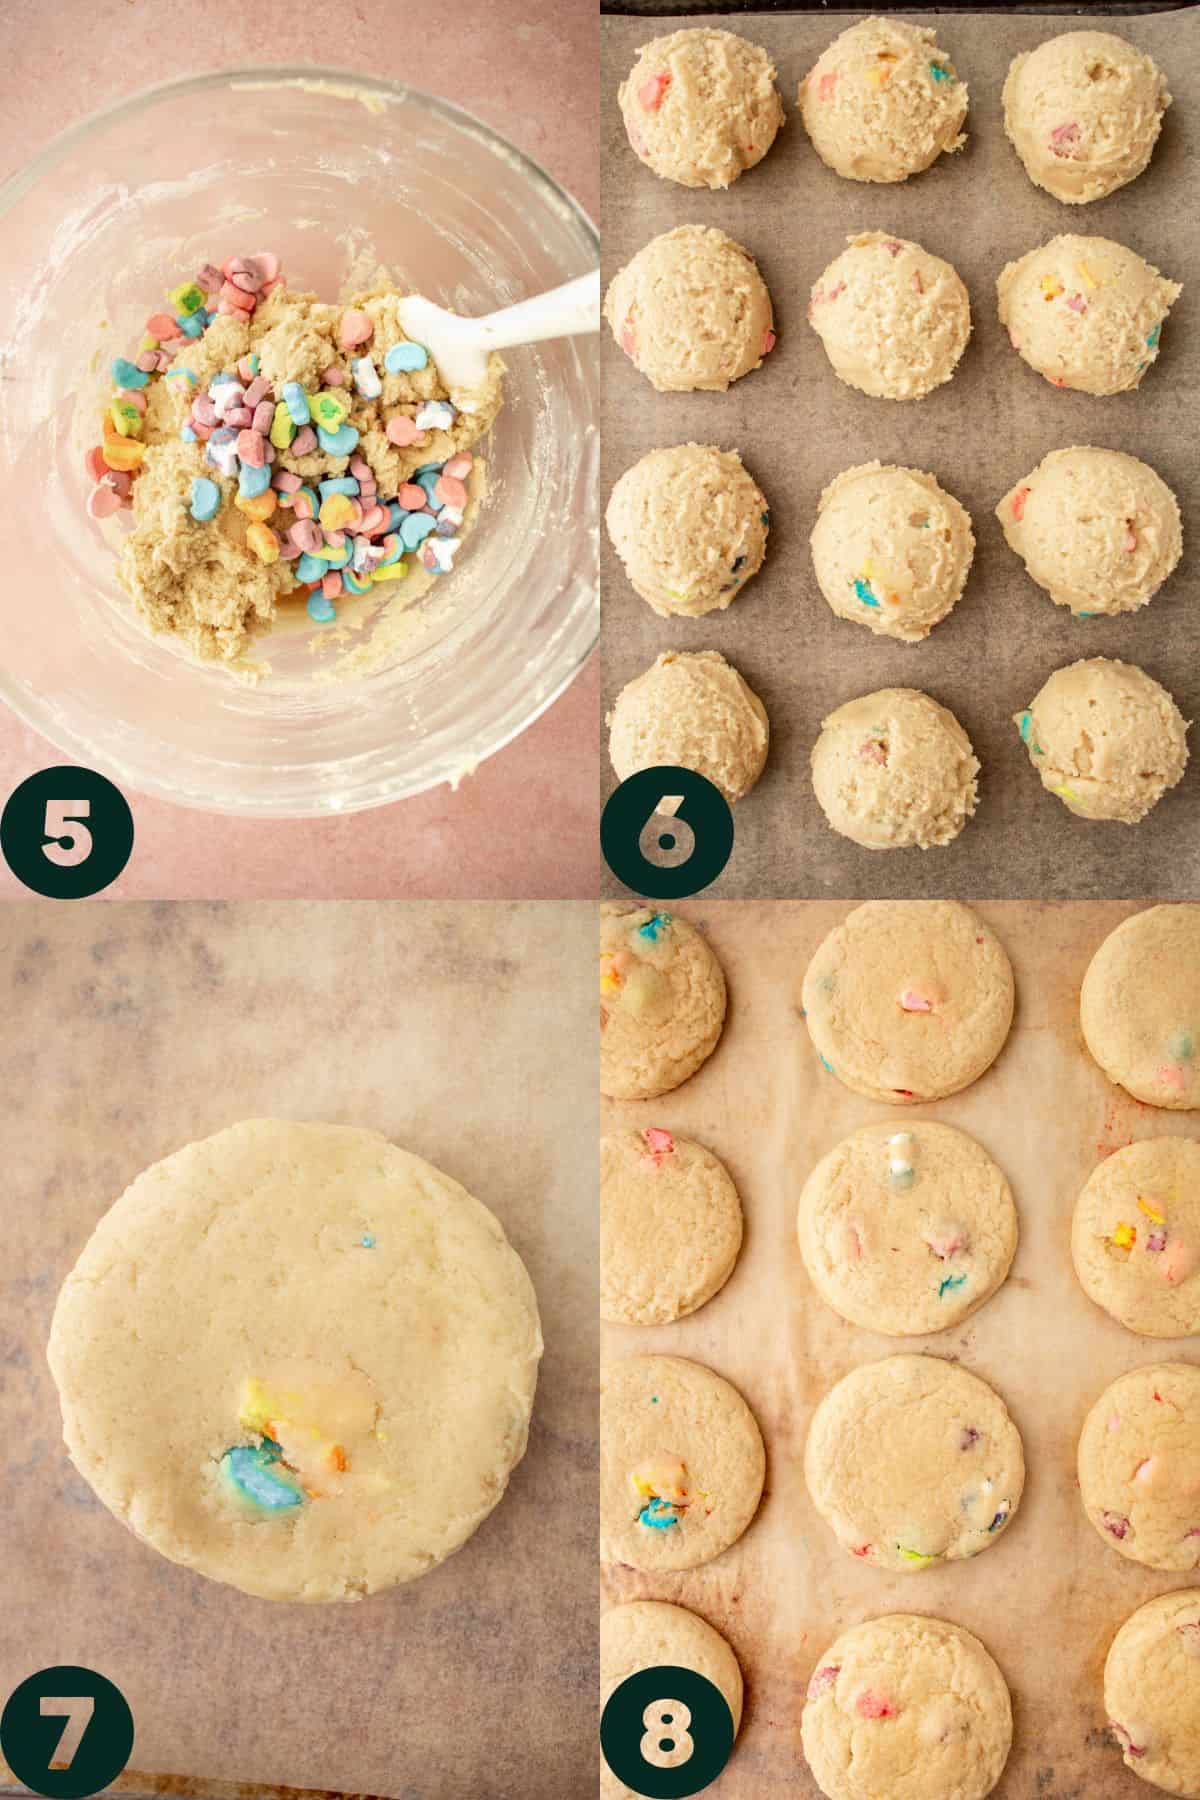 step by step photos - lucky charms cereal mixed in, dough scooped into balls, dough flattened to a thick disc, baked cookies